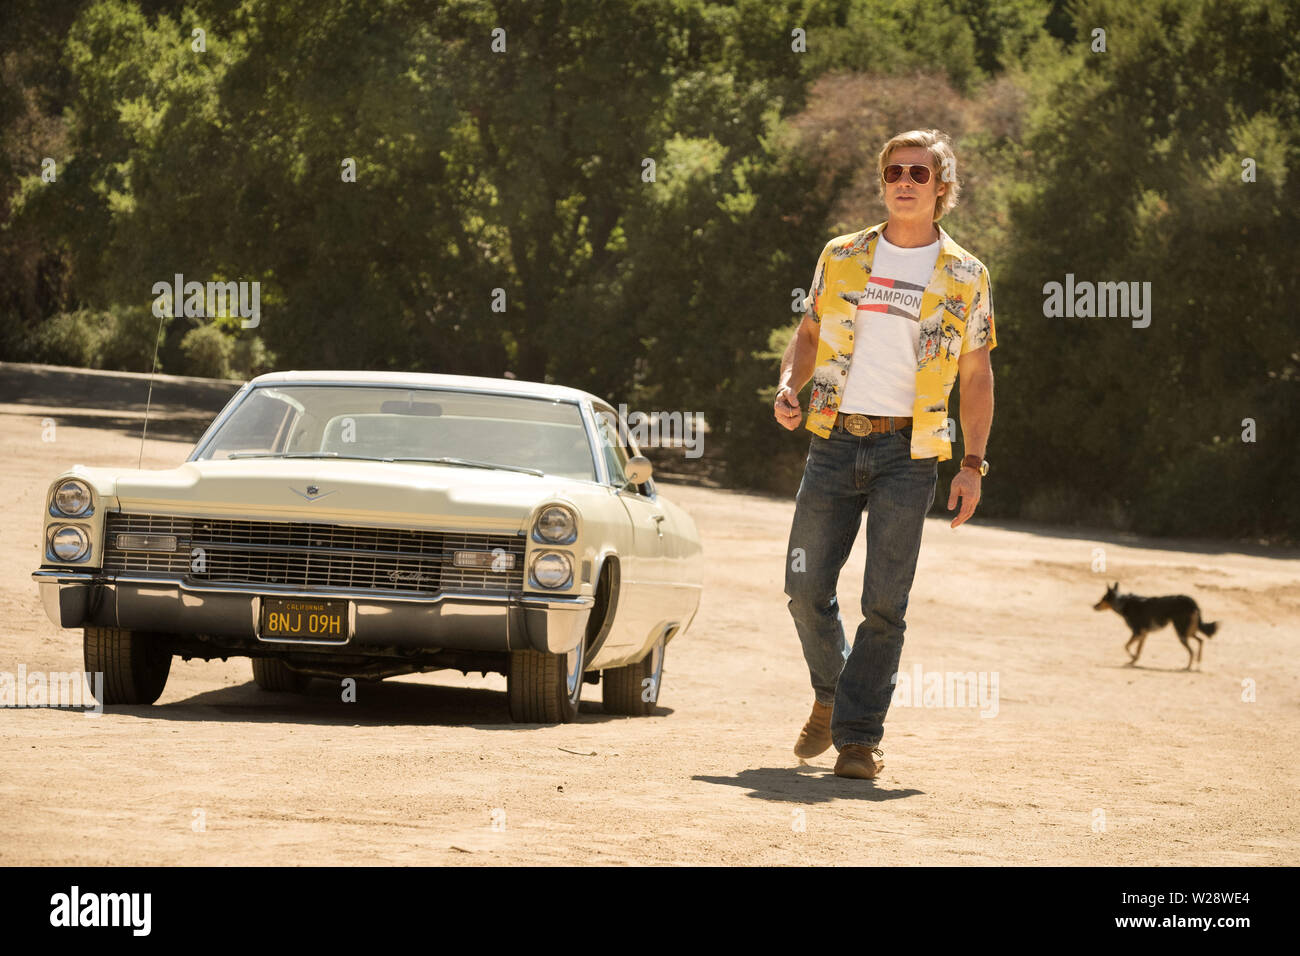 RELEASE DATE: August 9, 2019 TITLE: Once Upon a Time in Hollywood STUDIO: Columbia Pictures DIRECTOR: Quentin Tarantino PLOT: A TV actor and his stunt double embark on an odyssey to make a name for themselves in the film industry during the Charles Manson murders in 1969 Los Angeles. STARRING: BRAD PITT as Cliff Booth. (Credit Image: © Columbia Pictures/Entertainment Pictures) Stock Photo